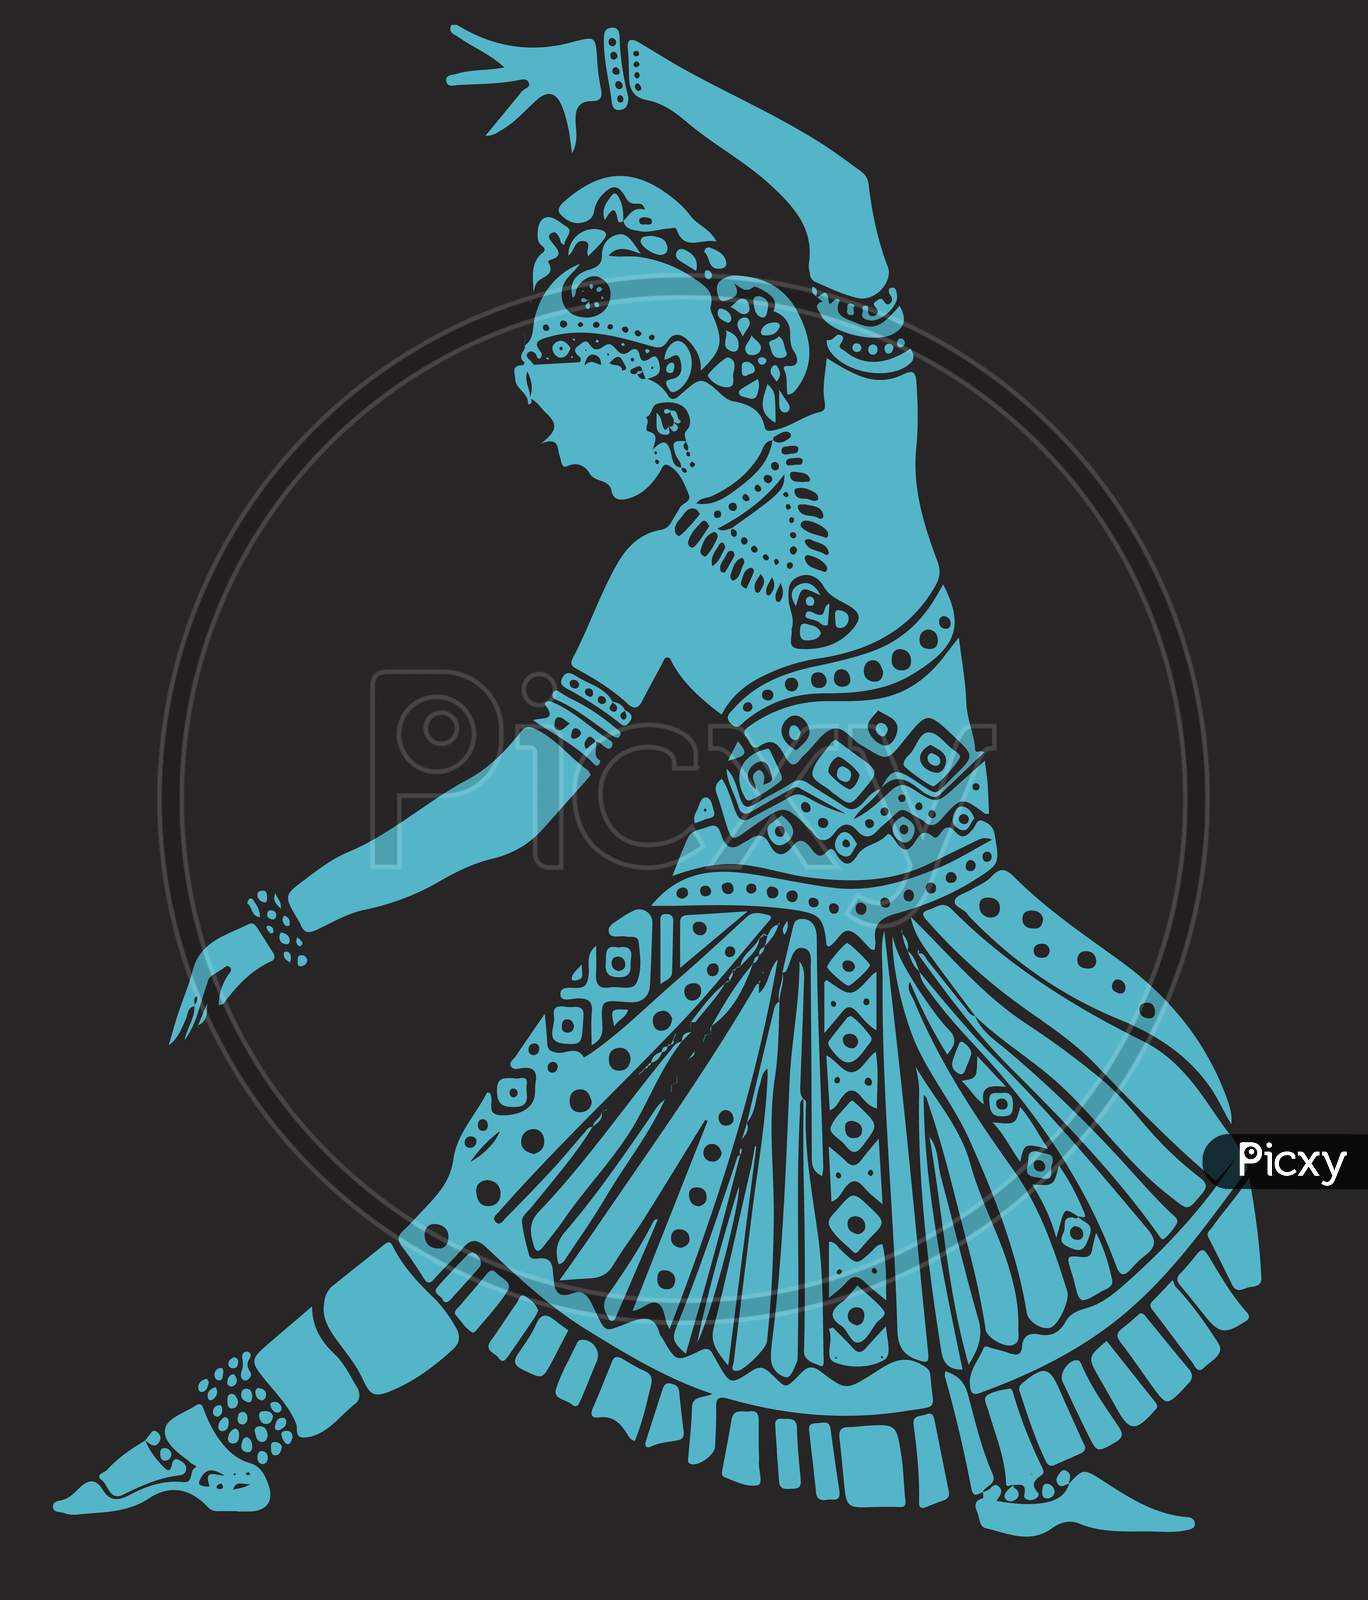 Drawing Of Well Traditional And Ethnic Dressed Lady Doing Bharatanatyam Dance. Silhouette Or Outline Editable Illustration Of Dancing Pose